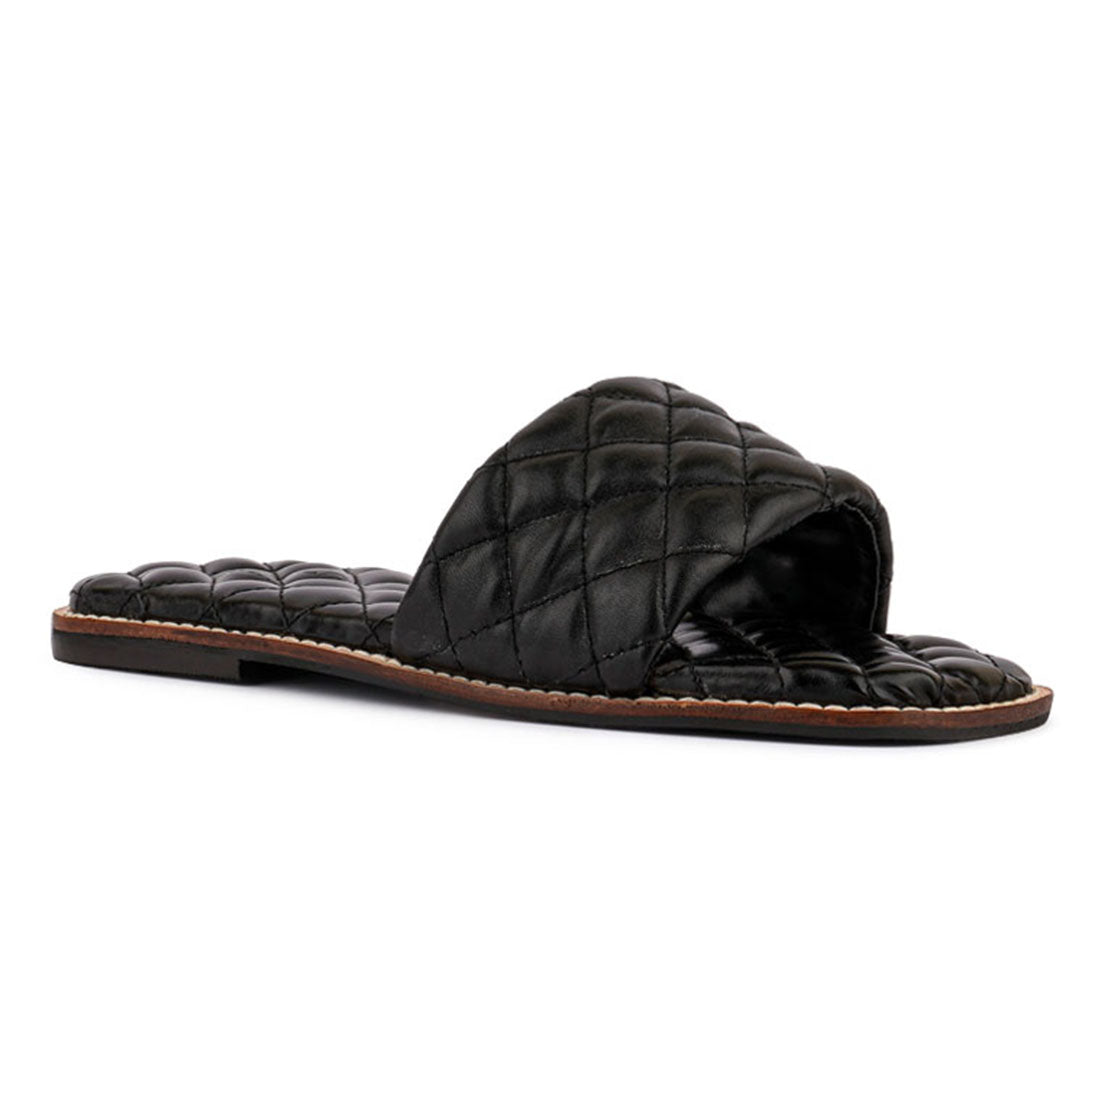 Black Handcrafted Quilted Summer Flats